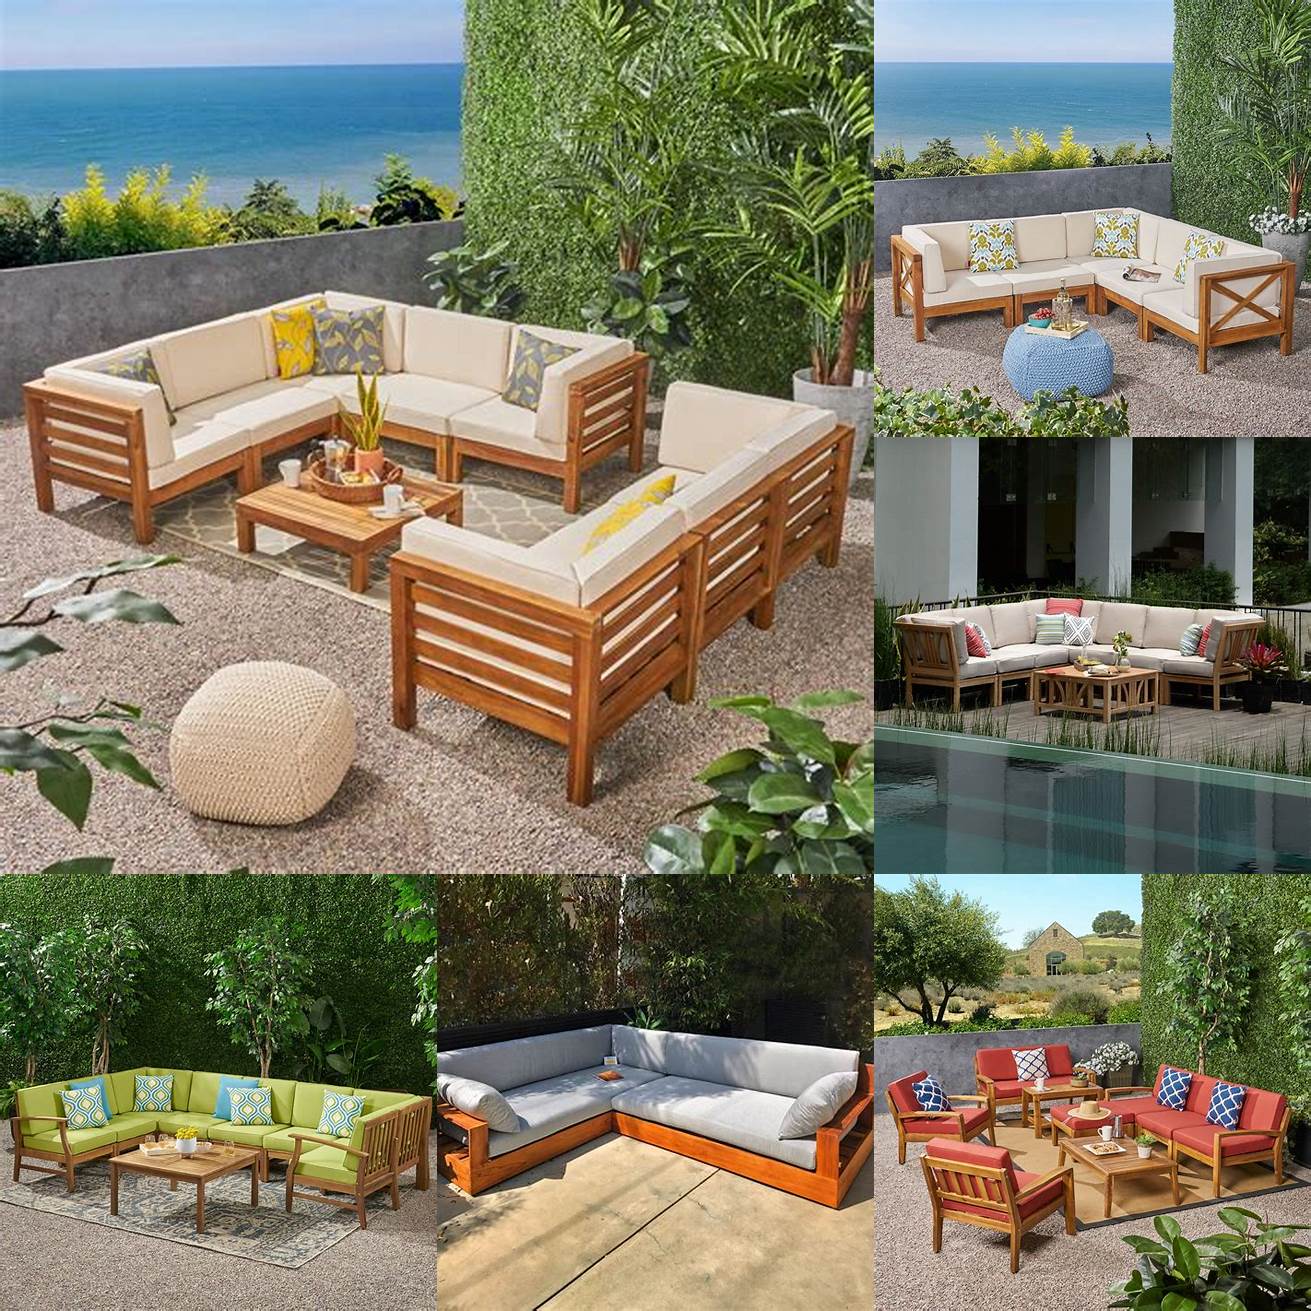 A Photo of Teak Sectional Patio Furniture